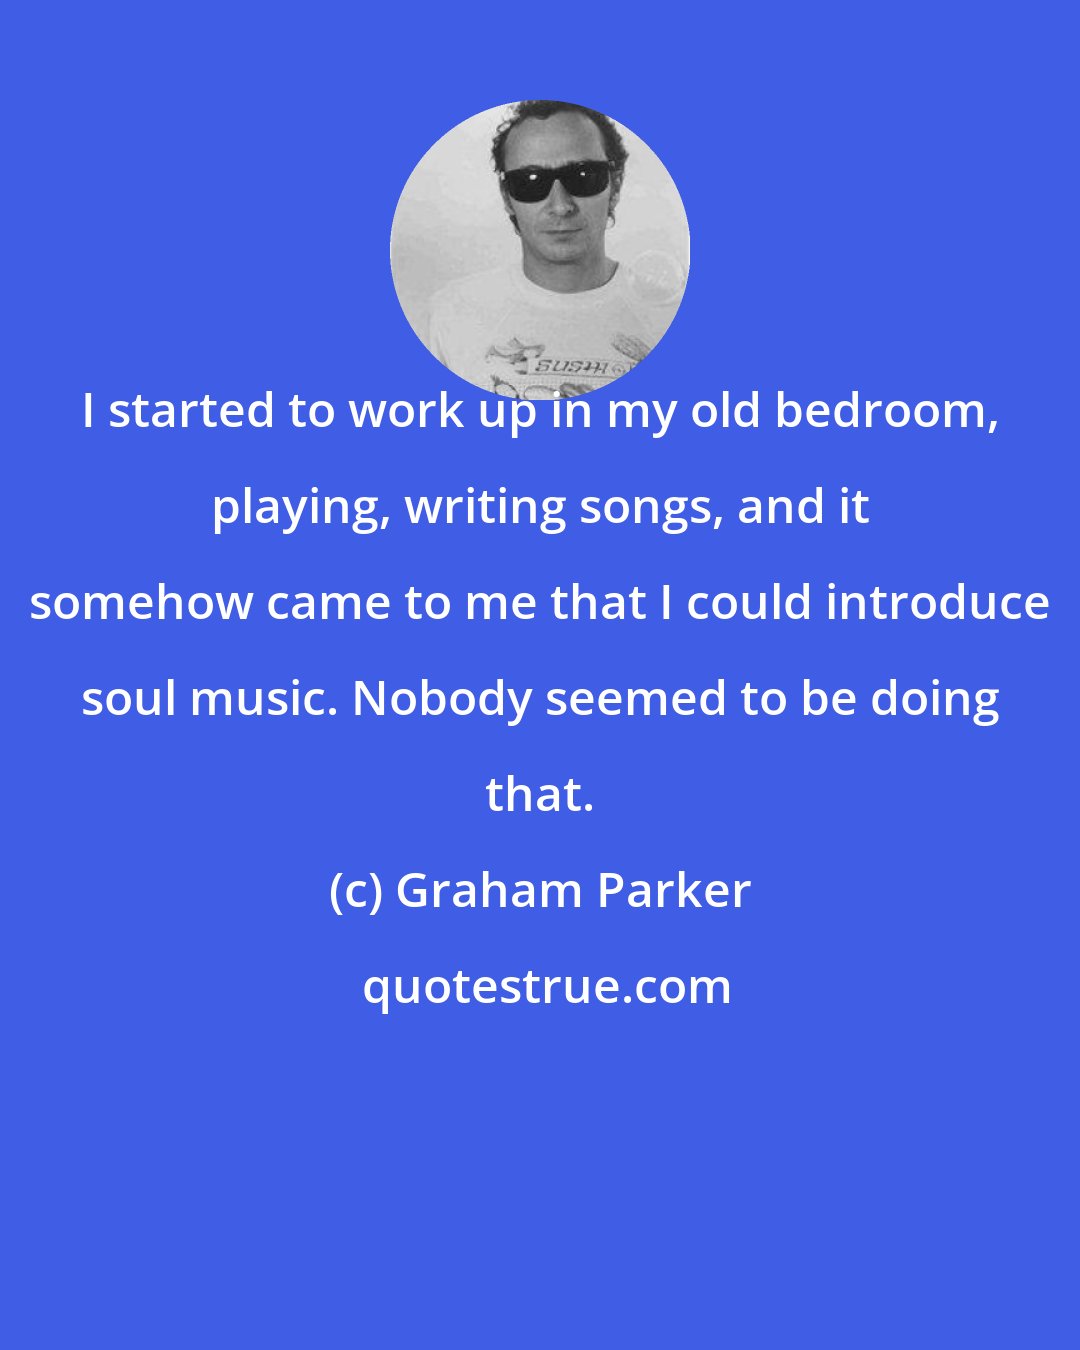 Graham Parker: I started to work up in my old bedroom, playing, writing songs, and it somehow came to me that I could introduce soul music. Nobody seemed to be doing that.